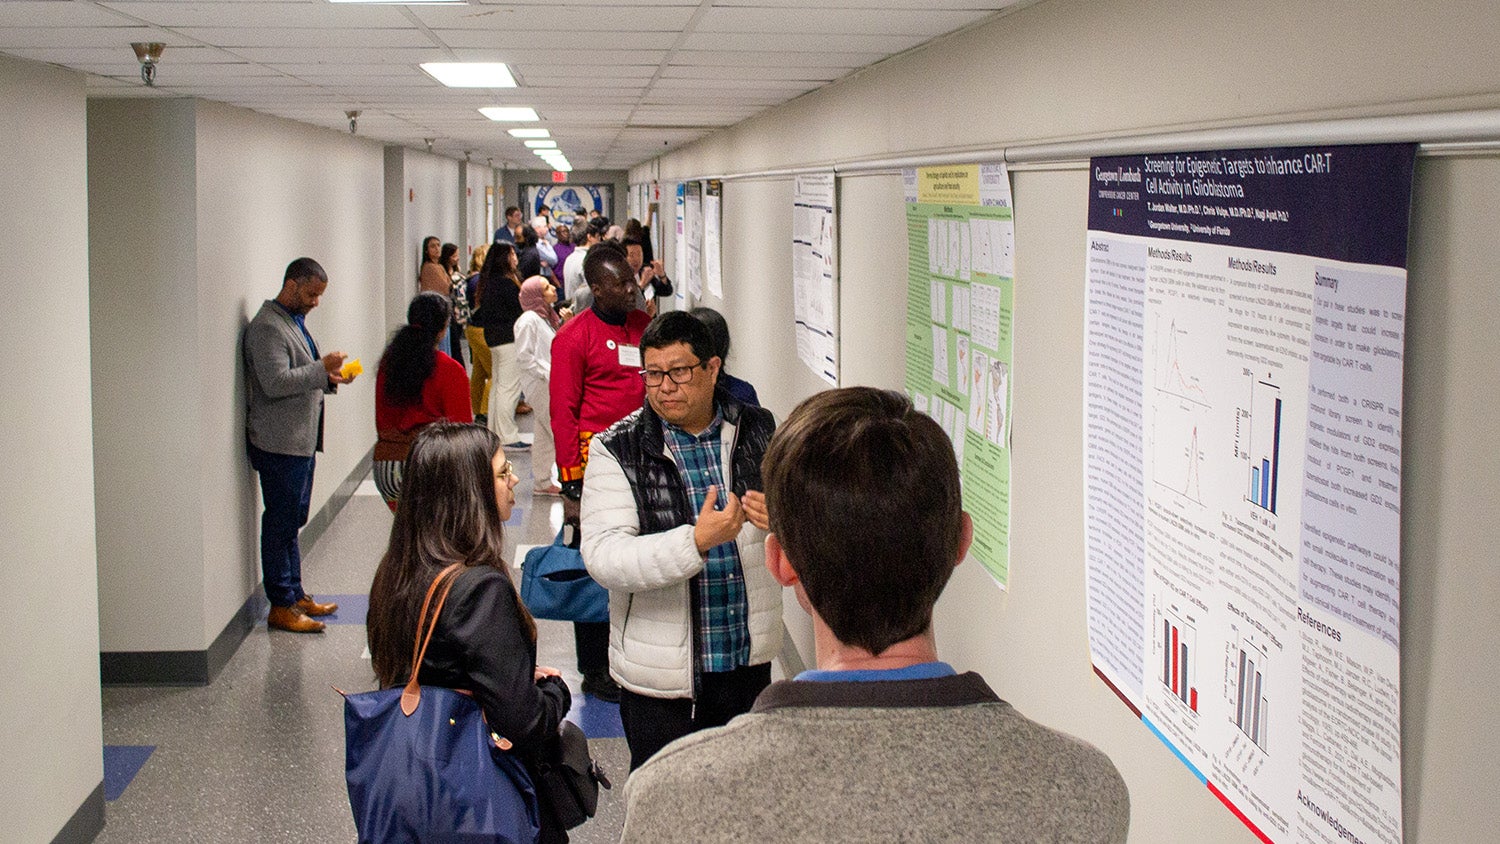 Symposium attendees discuss research in Pre-Clinical Hallway C during poster presentations.